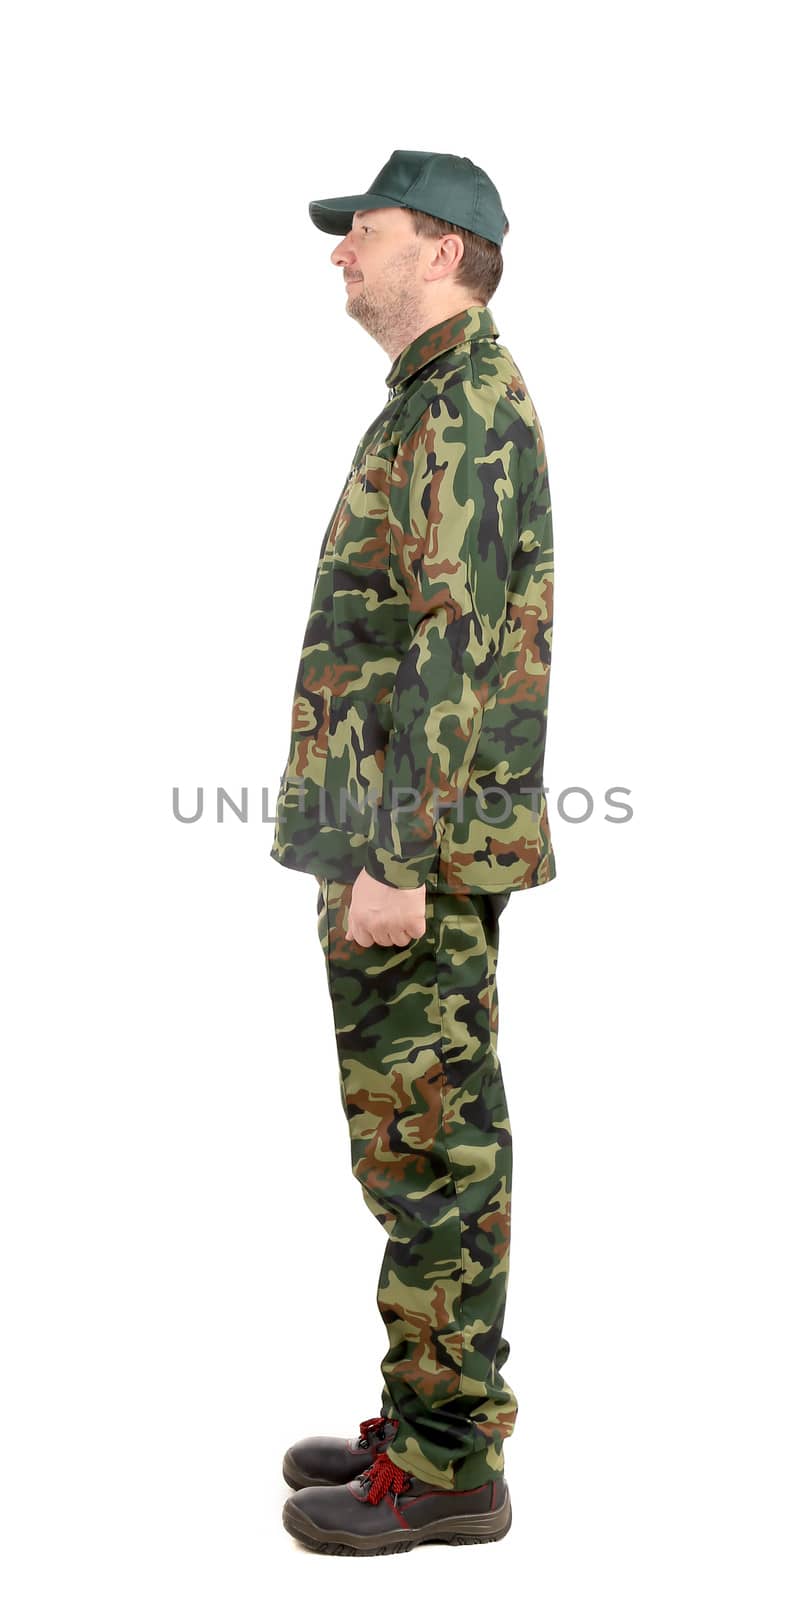 Man in military suit. Side view. Isolated on a white background.